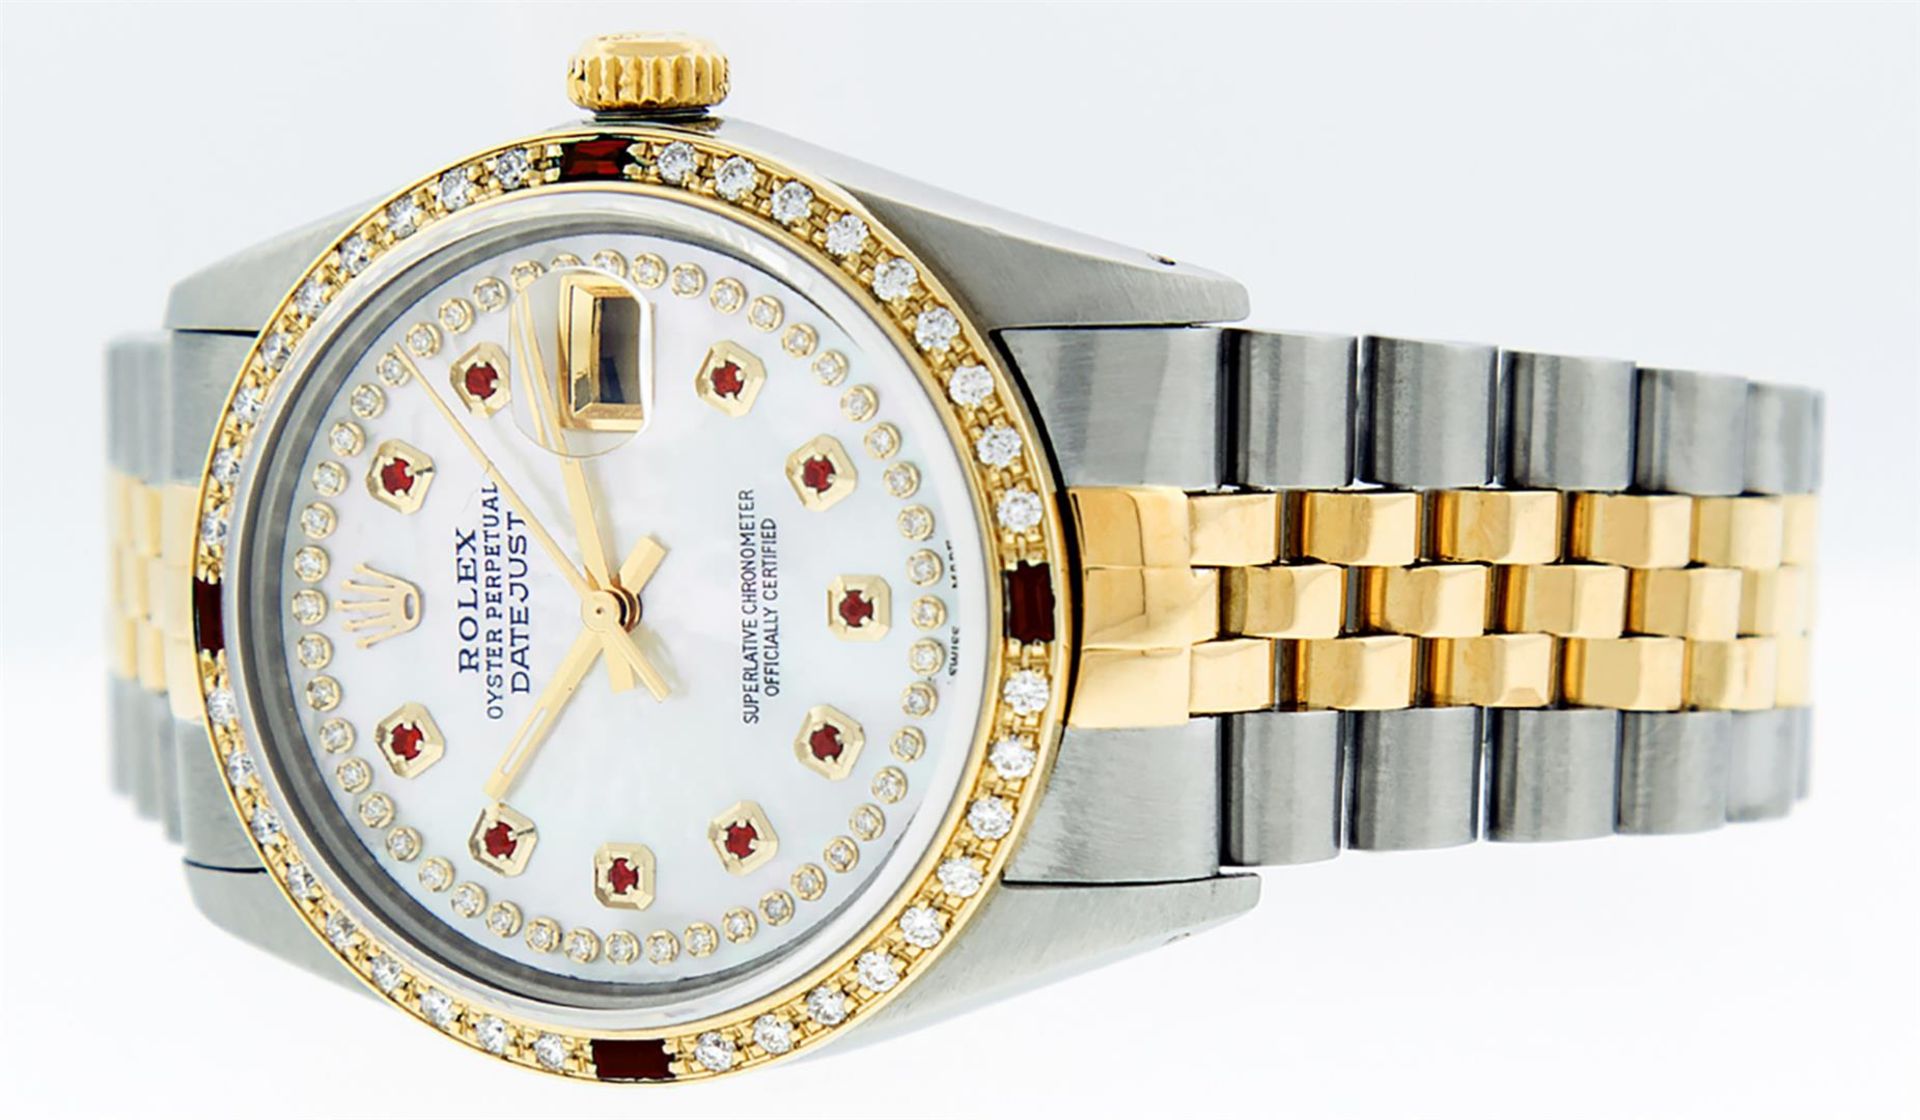 Rolex Mens 2 Tone Mother Of Pearl String Diamond & Ruby Datejust Wristwatch - Image 7 of 9